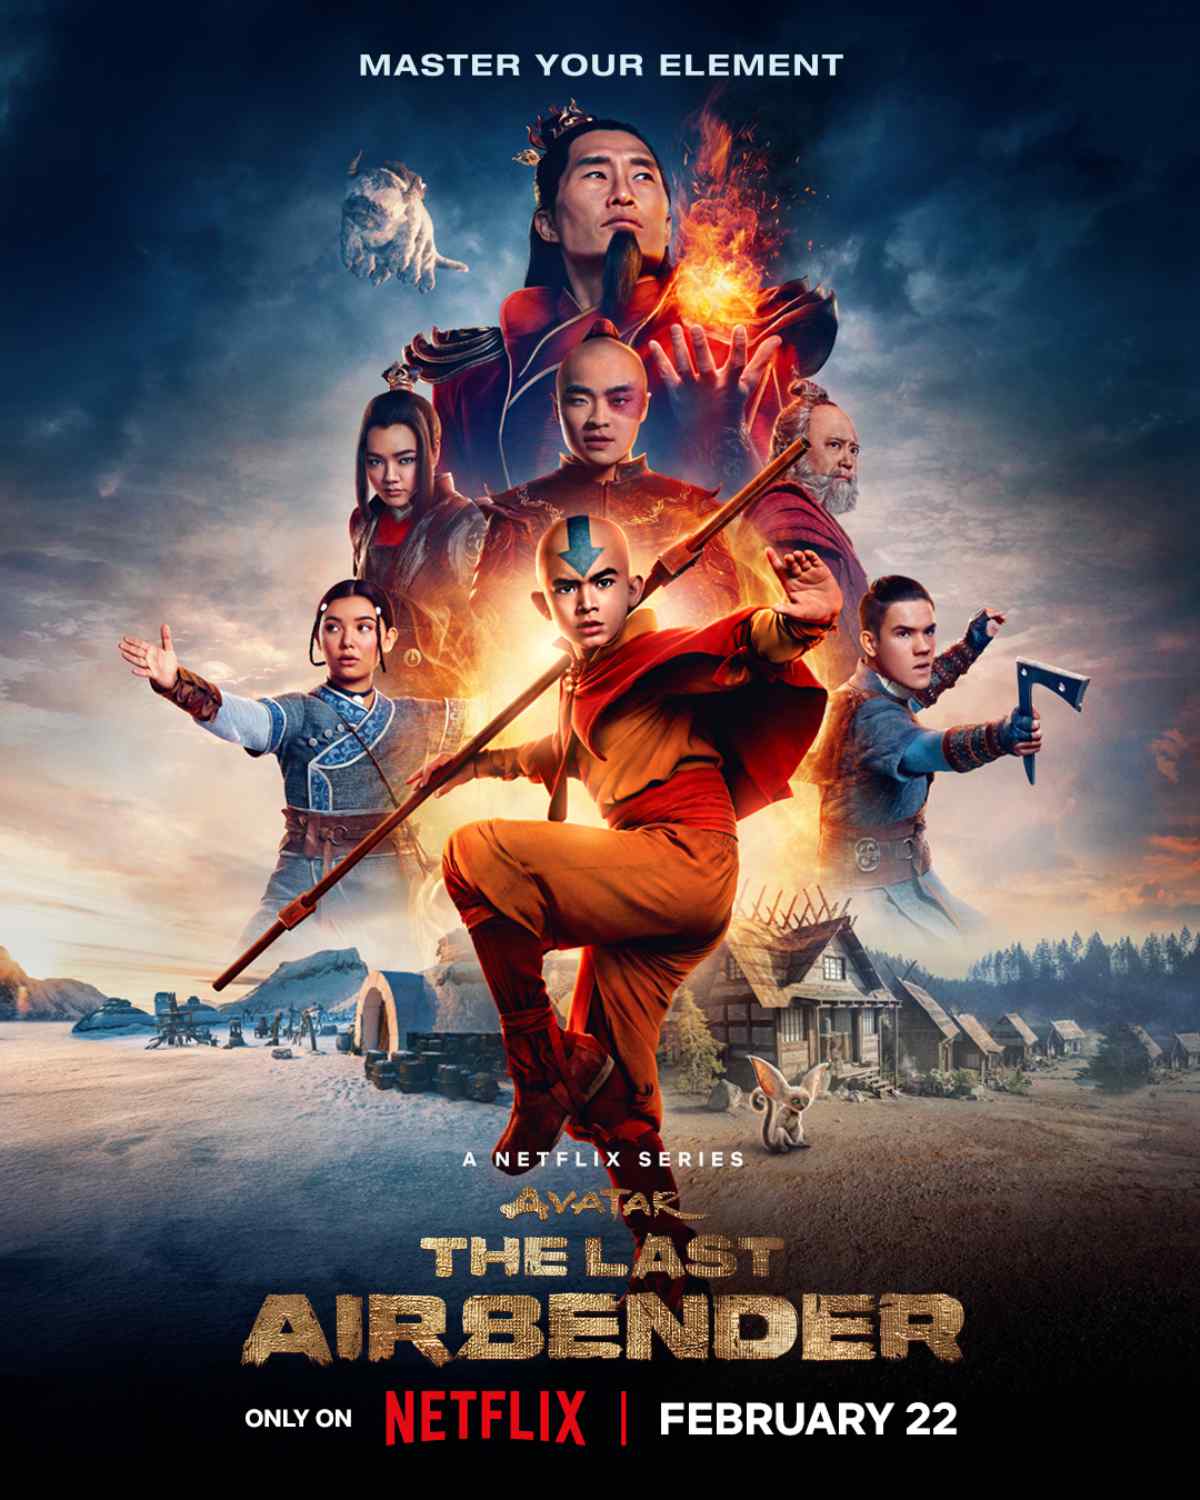 New Trailer for Avatar: The Last Airbender Unveiled